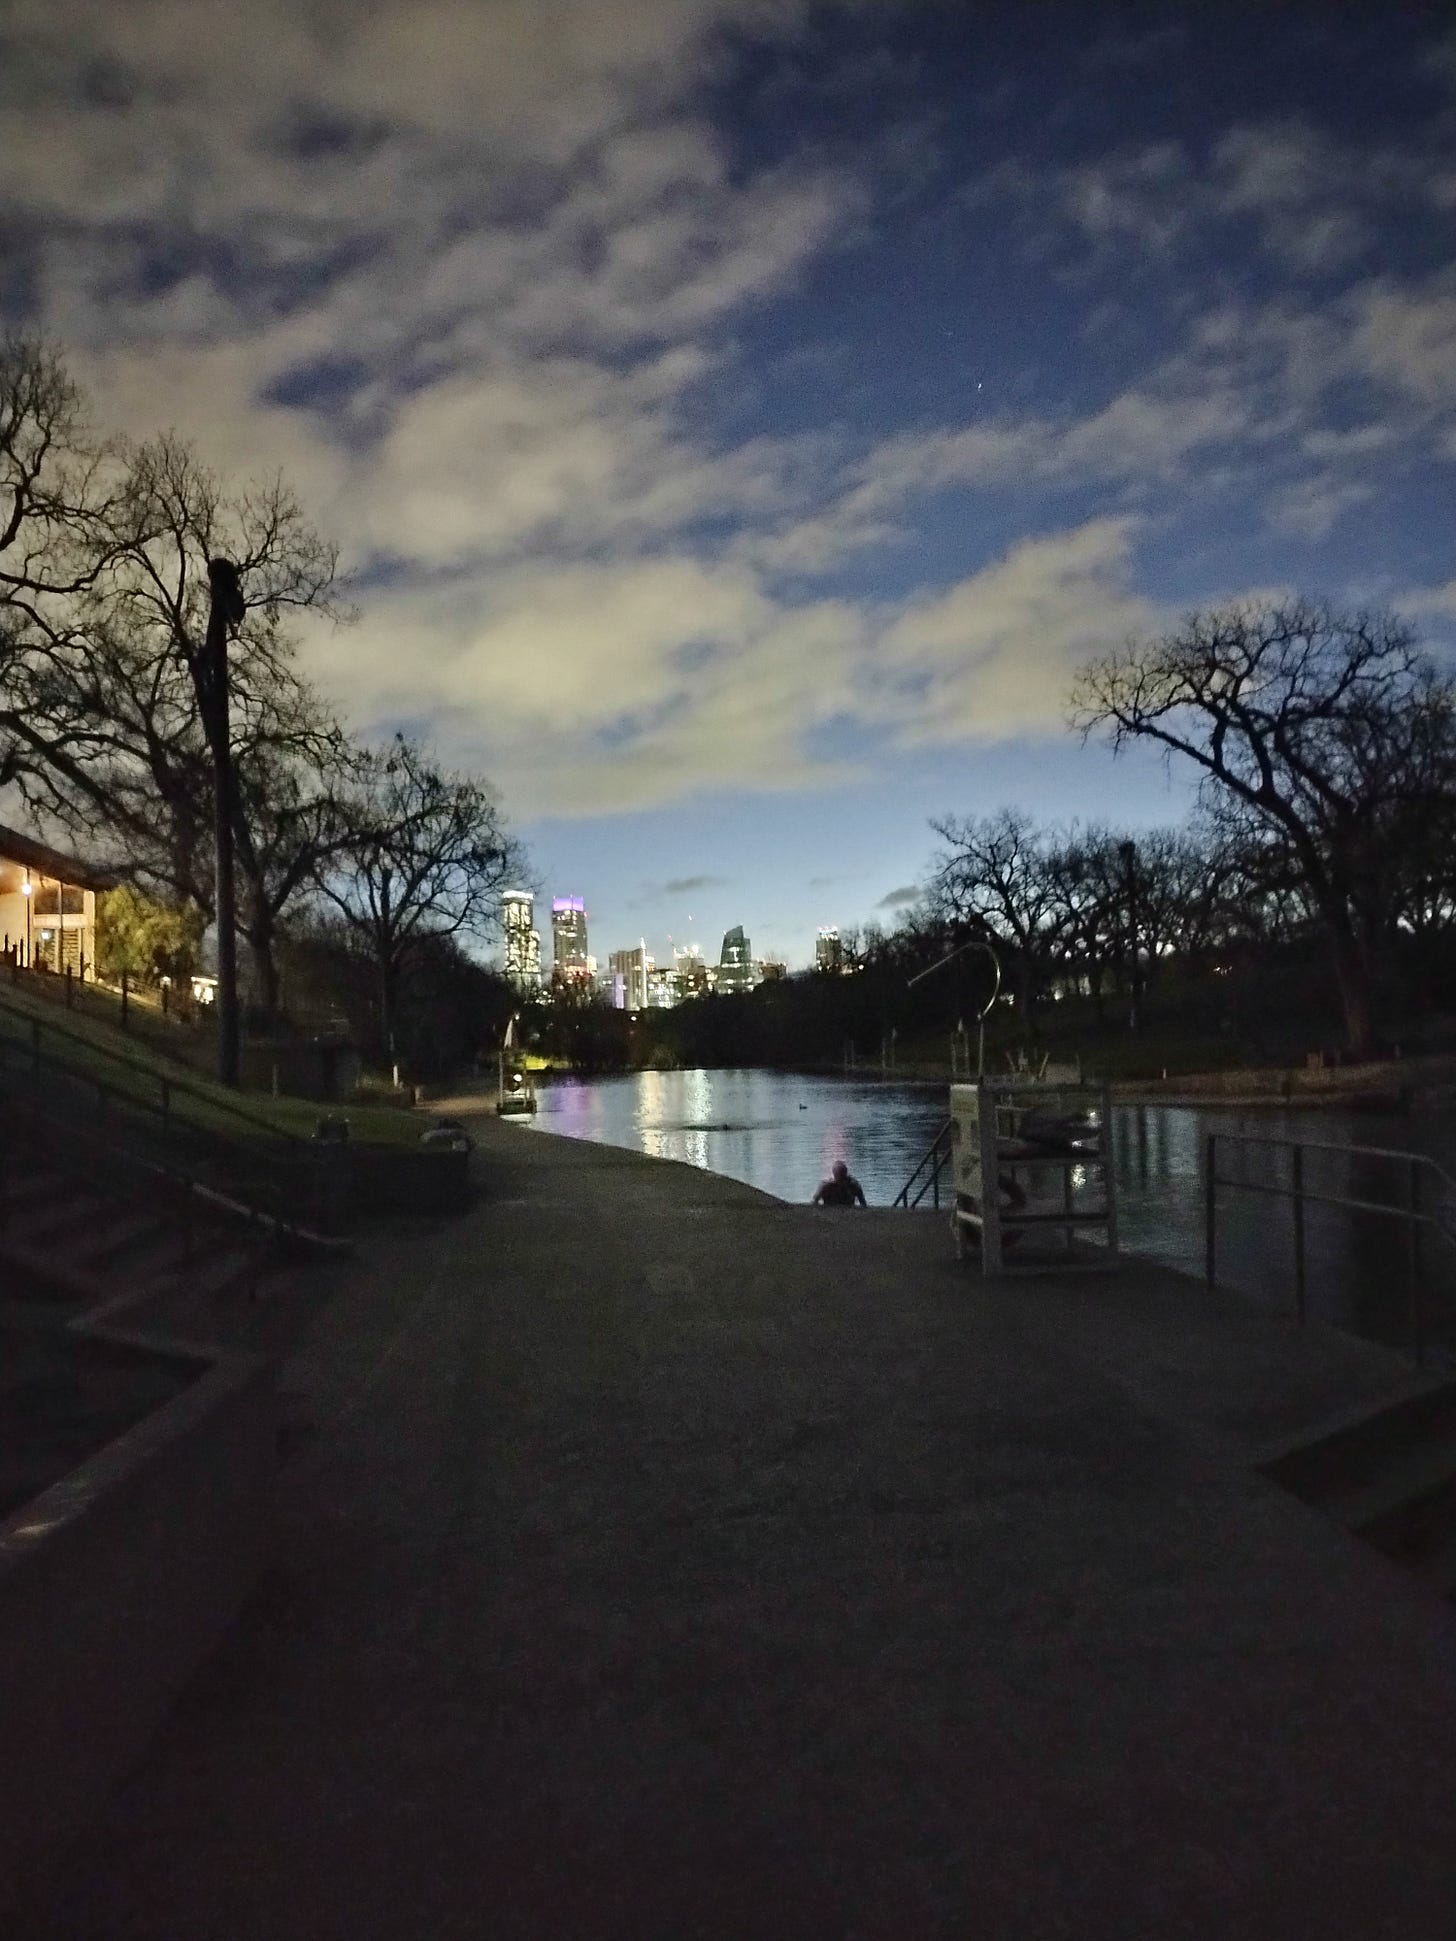 Barton Springs pool at dawn, skyline at the far end, water flanked by bare trees